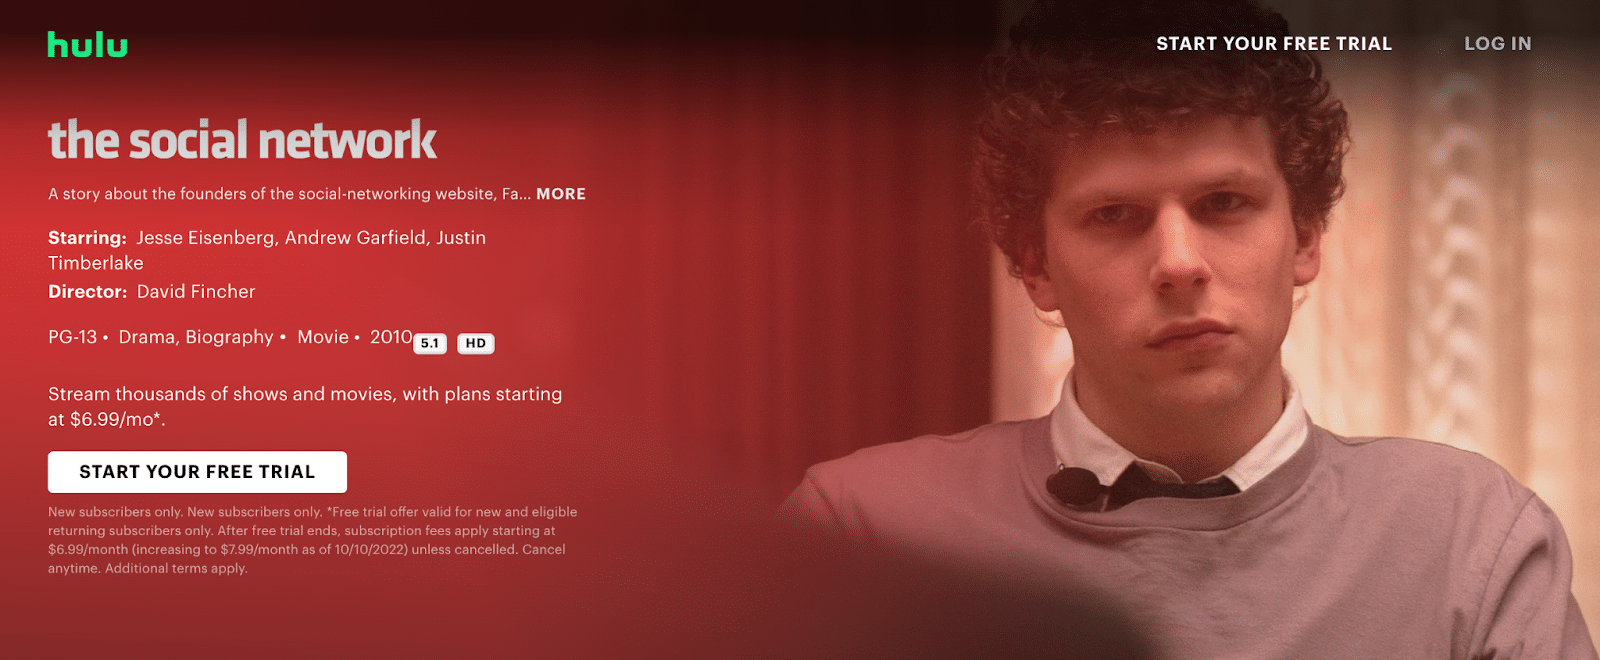 The Social Network movie available on Hulu